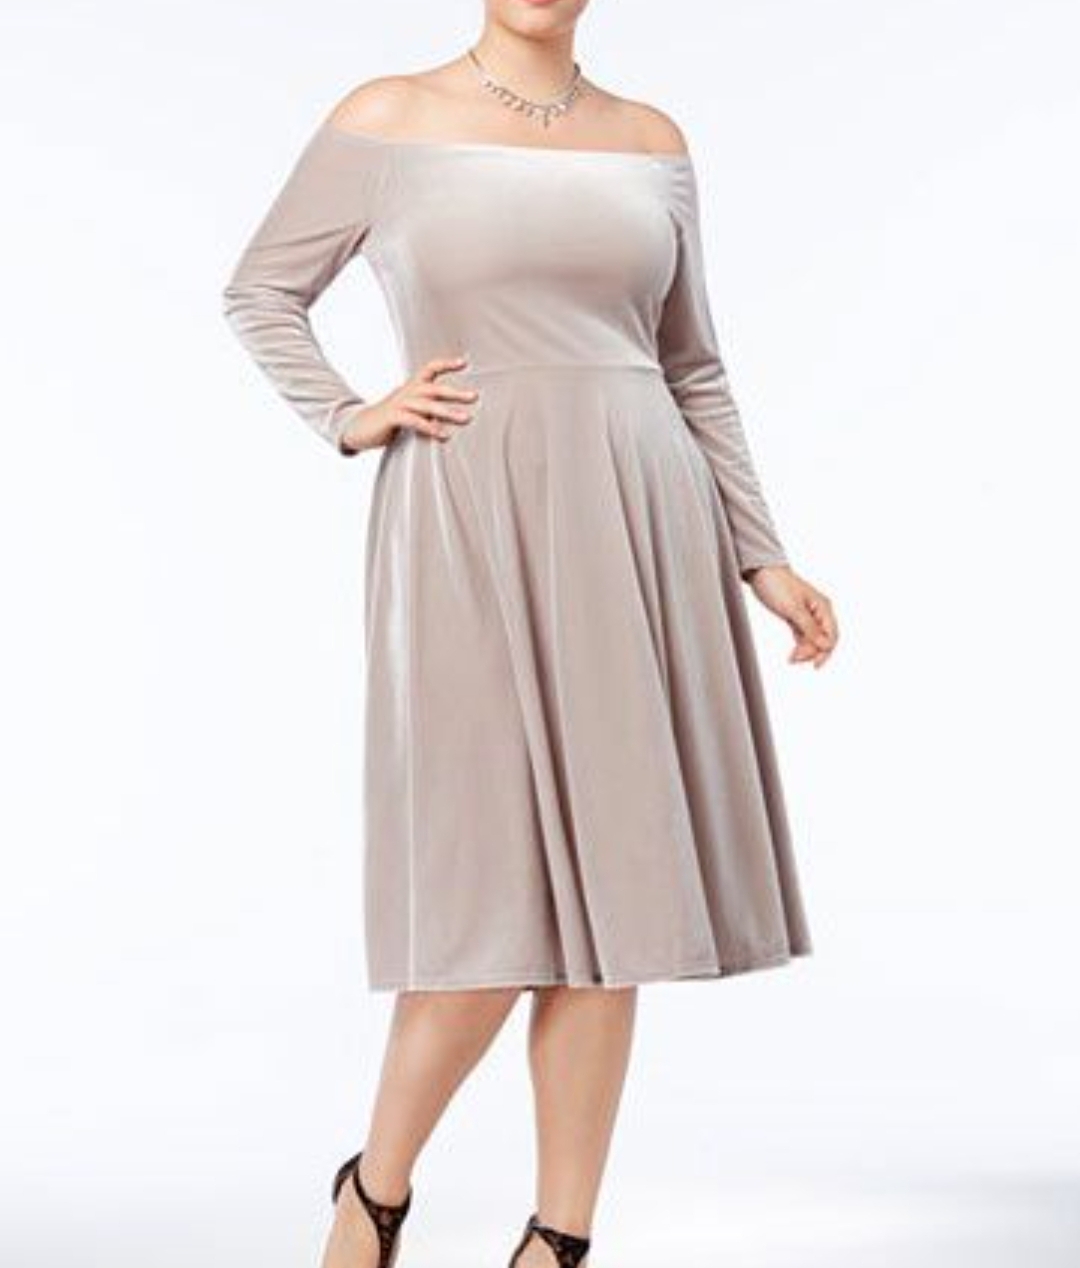 Great Cocktail Dresses For Women Over 50